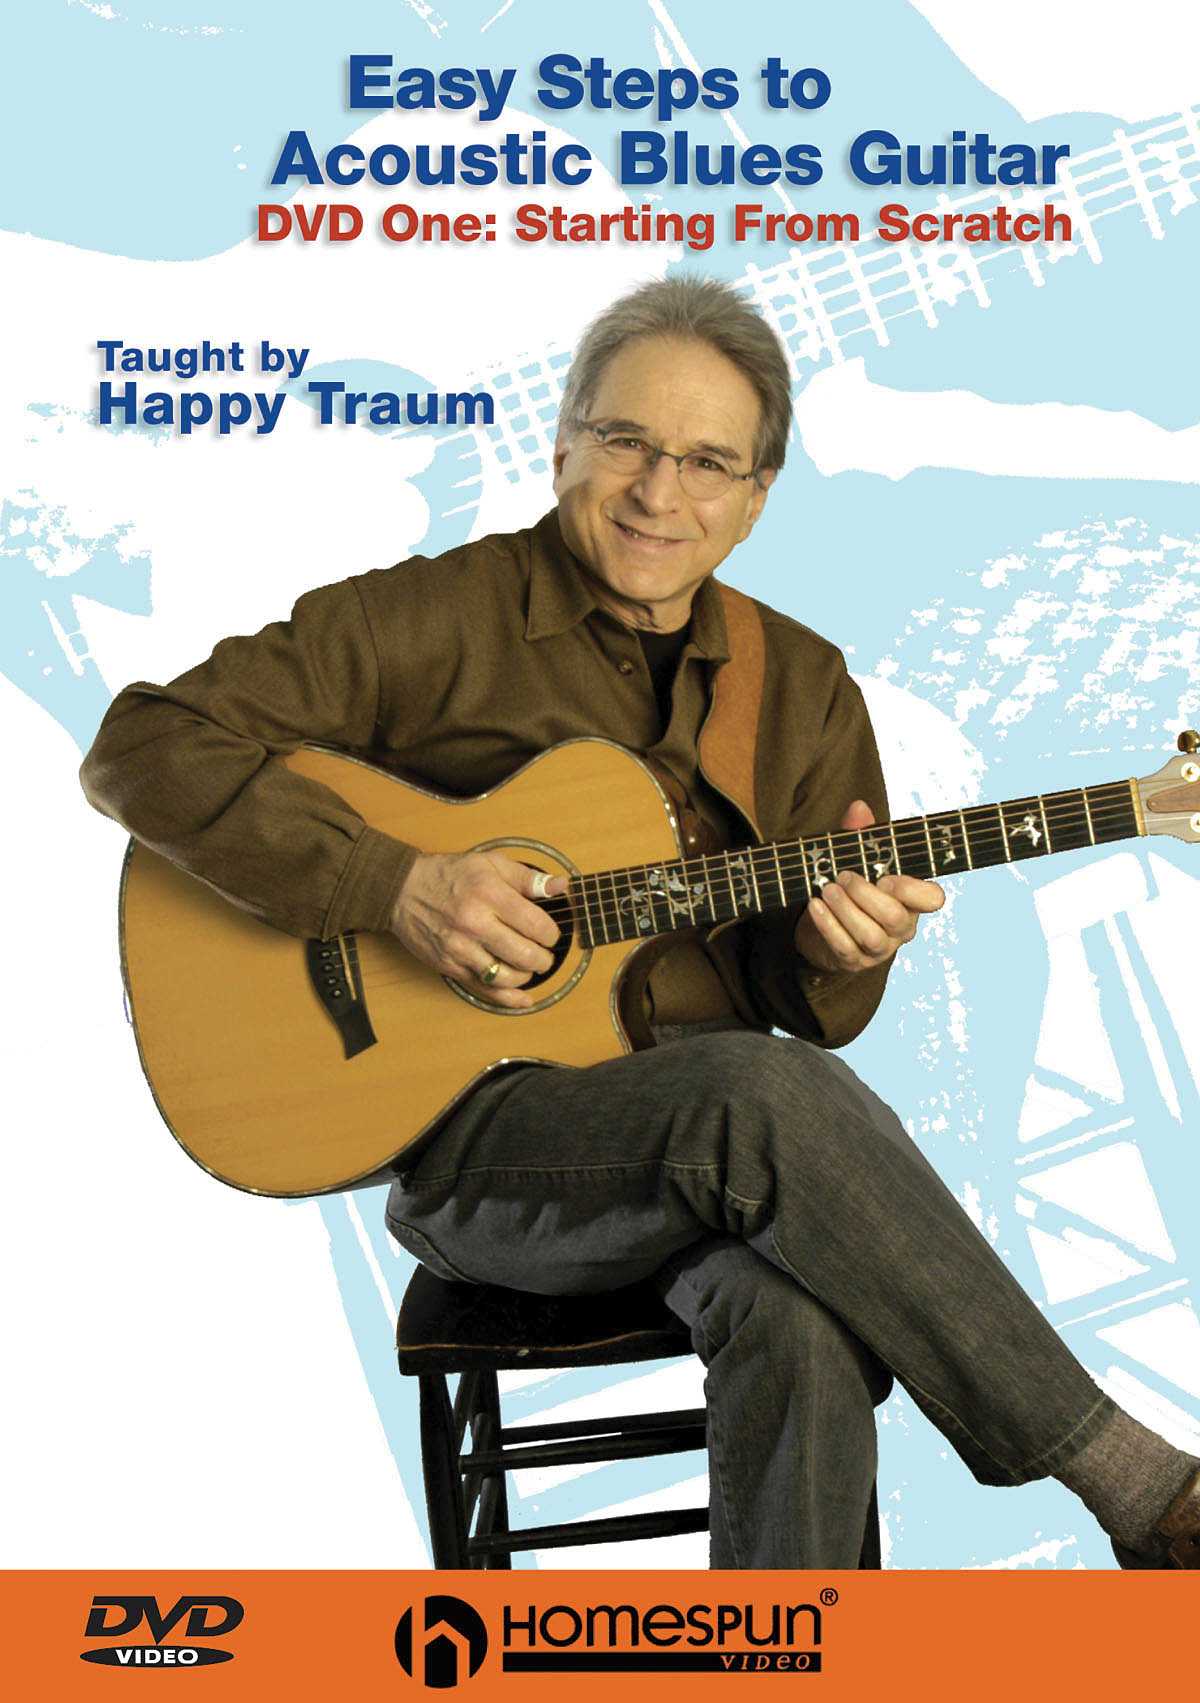 Image 1 of DVD - Easy Steps to Acoustic Blues Guitar: Vol. 1 - Starting From Scratch - SKU# 300-DVD190 : Product Type Media : Elderly Instruments